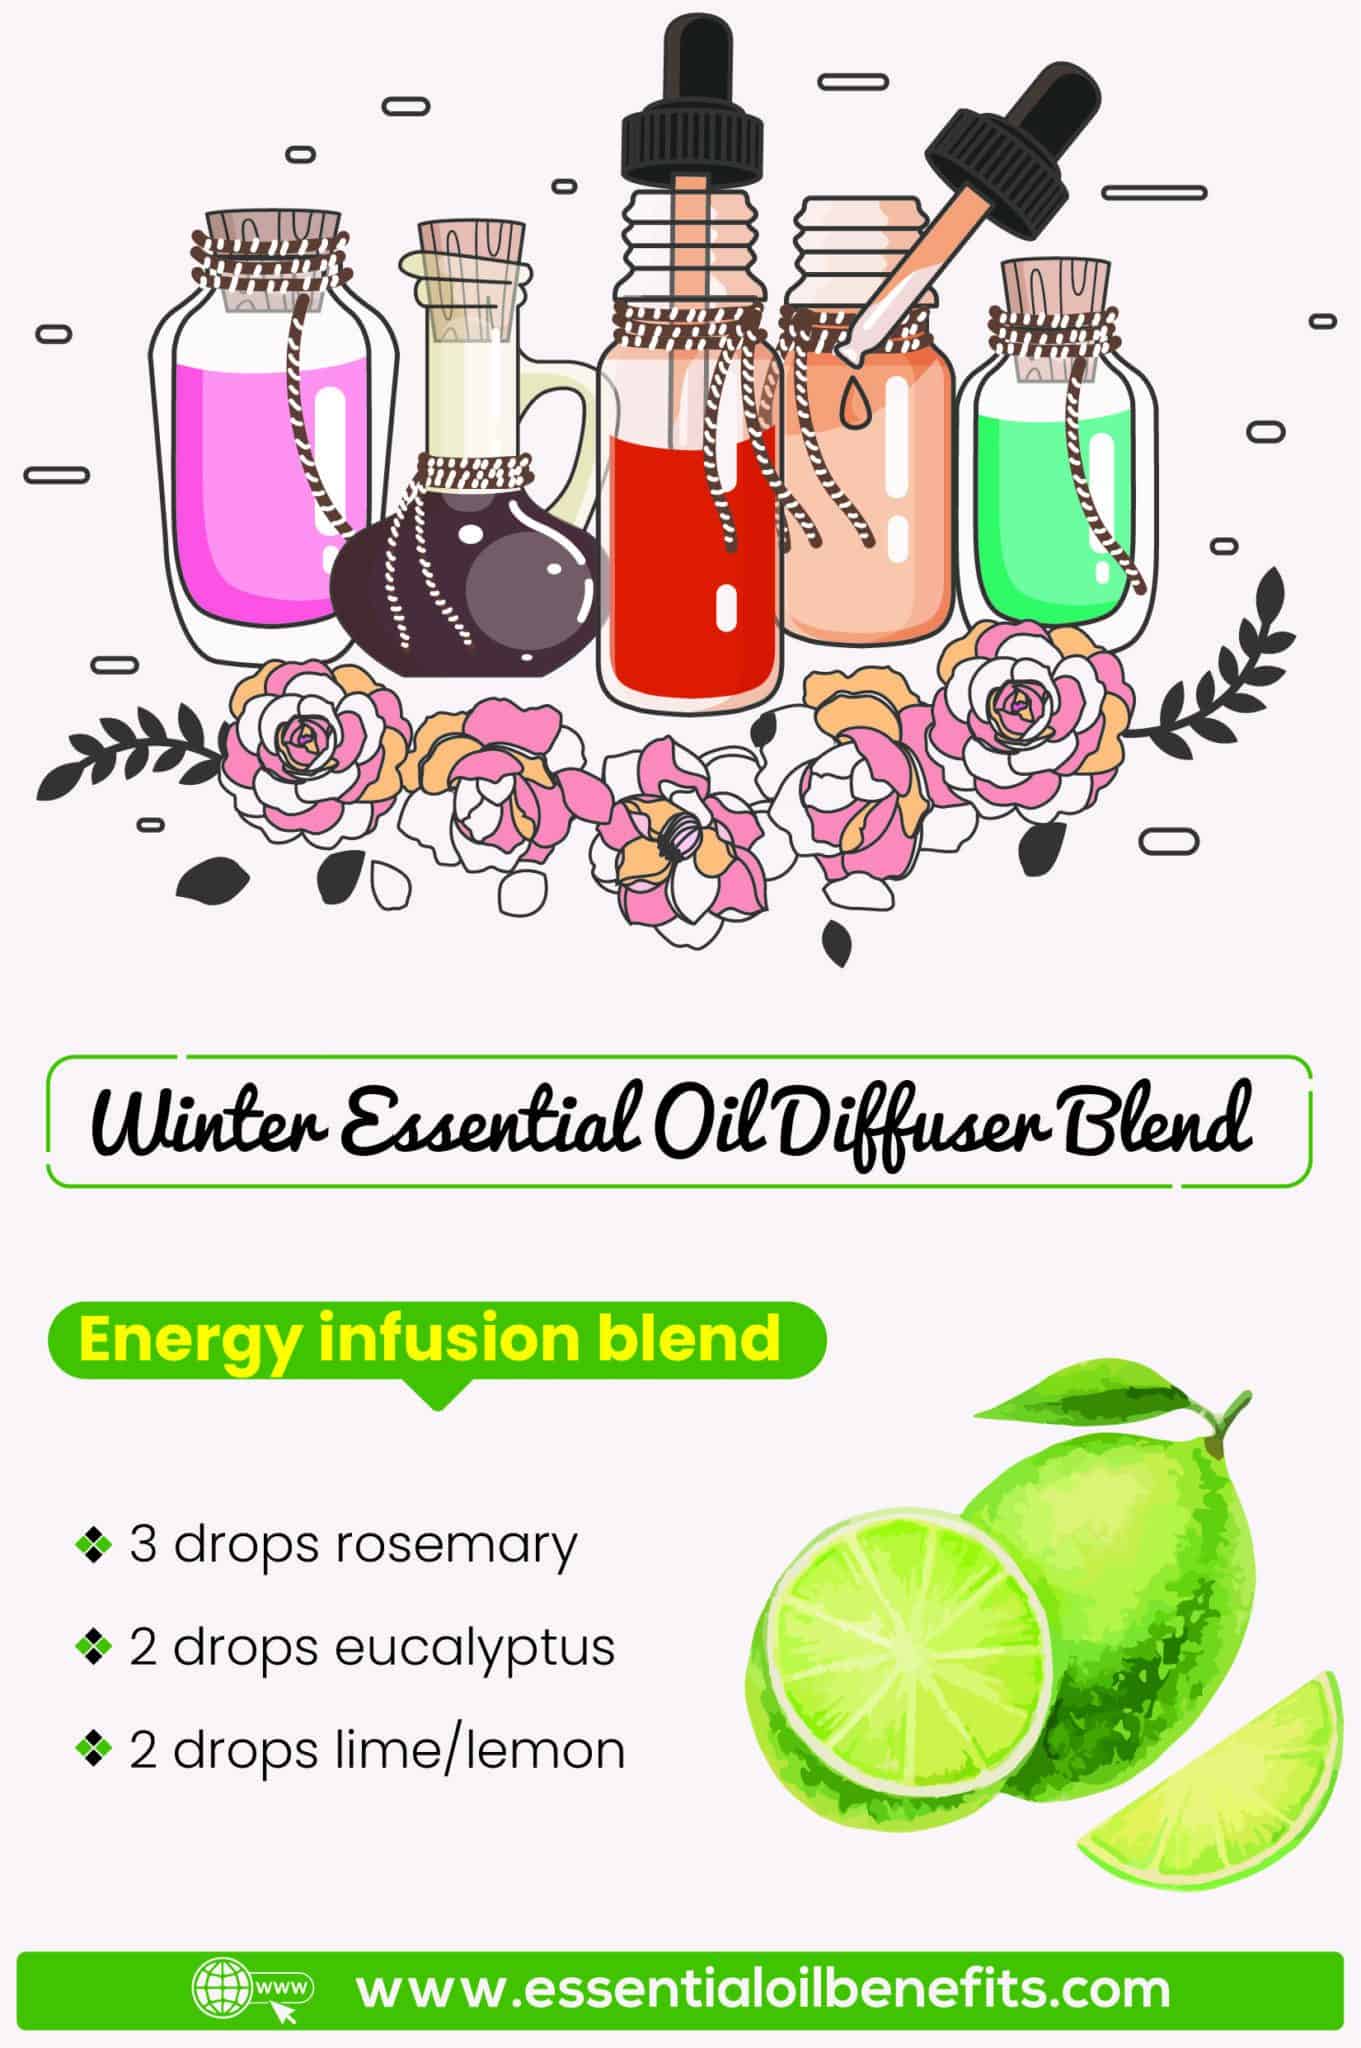 Must Have Essential Oils For Winter Essential Oil Benefits